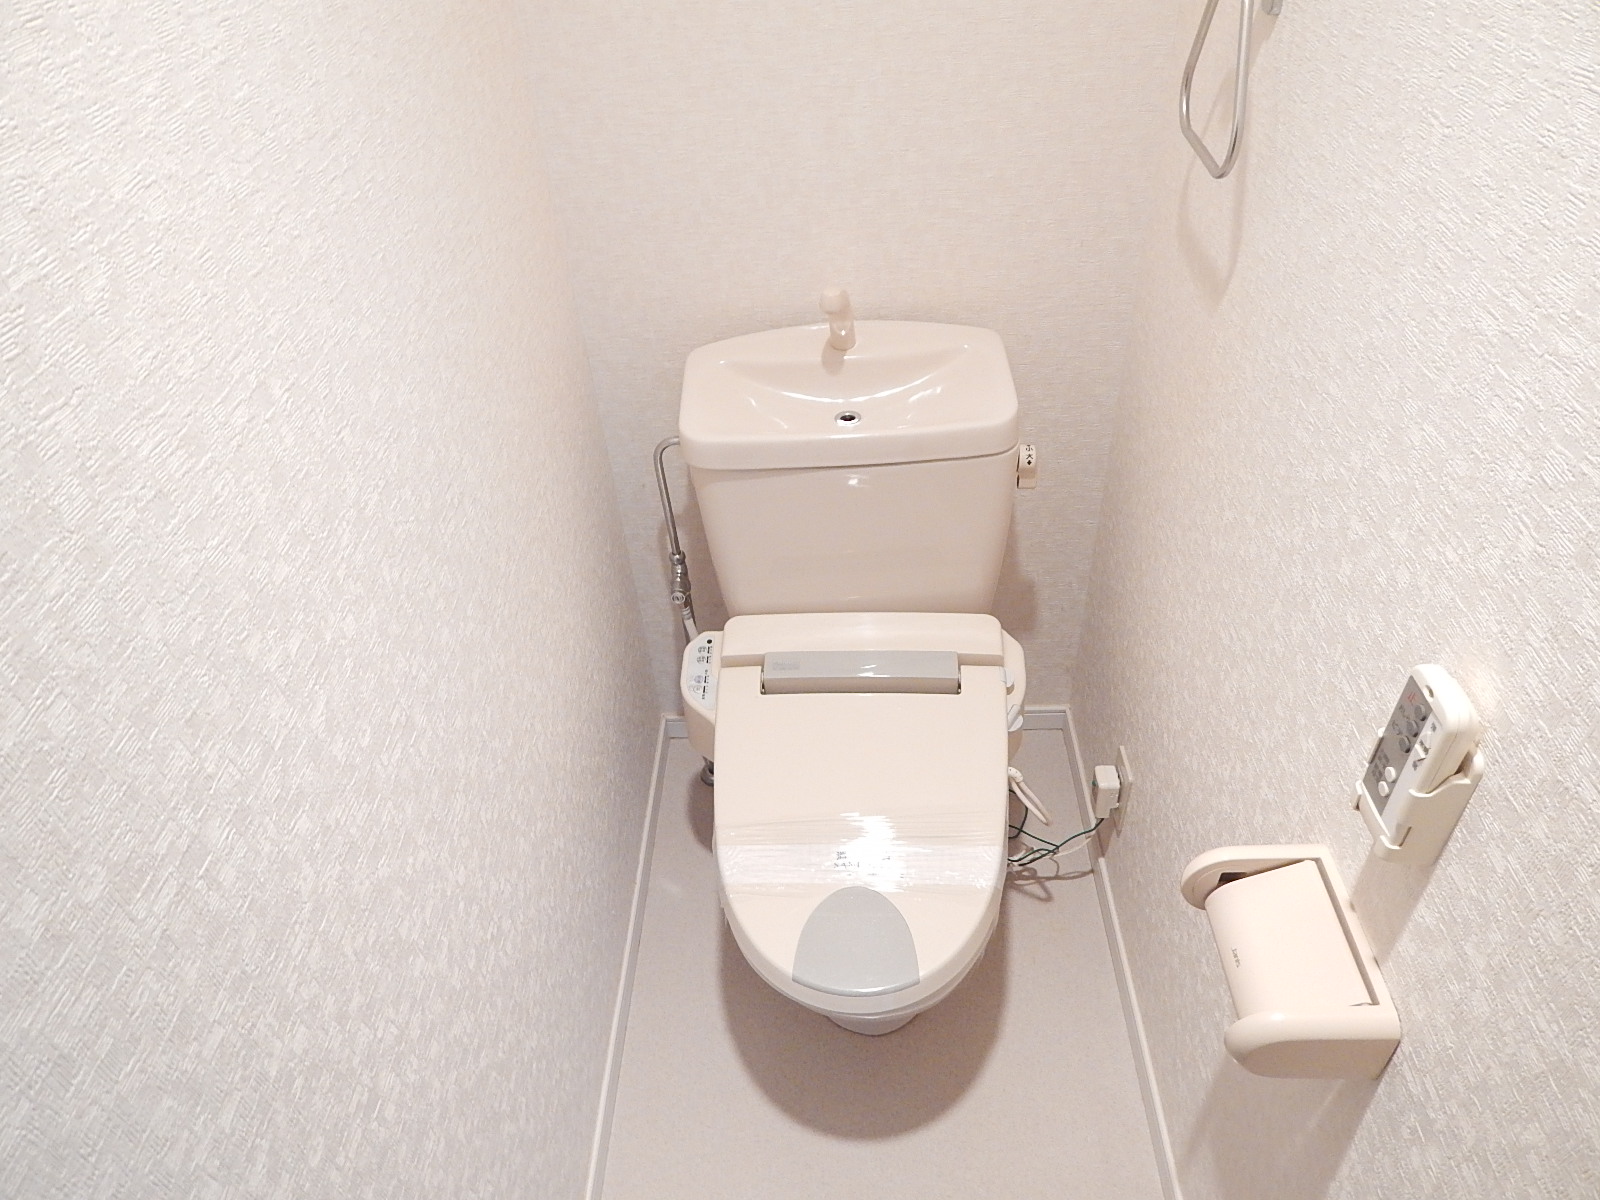 Toilet. The winter is with the best bidet